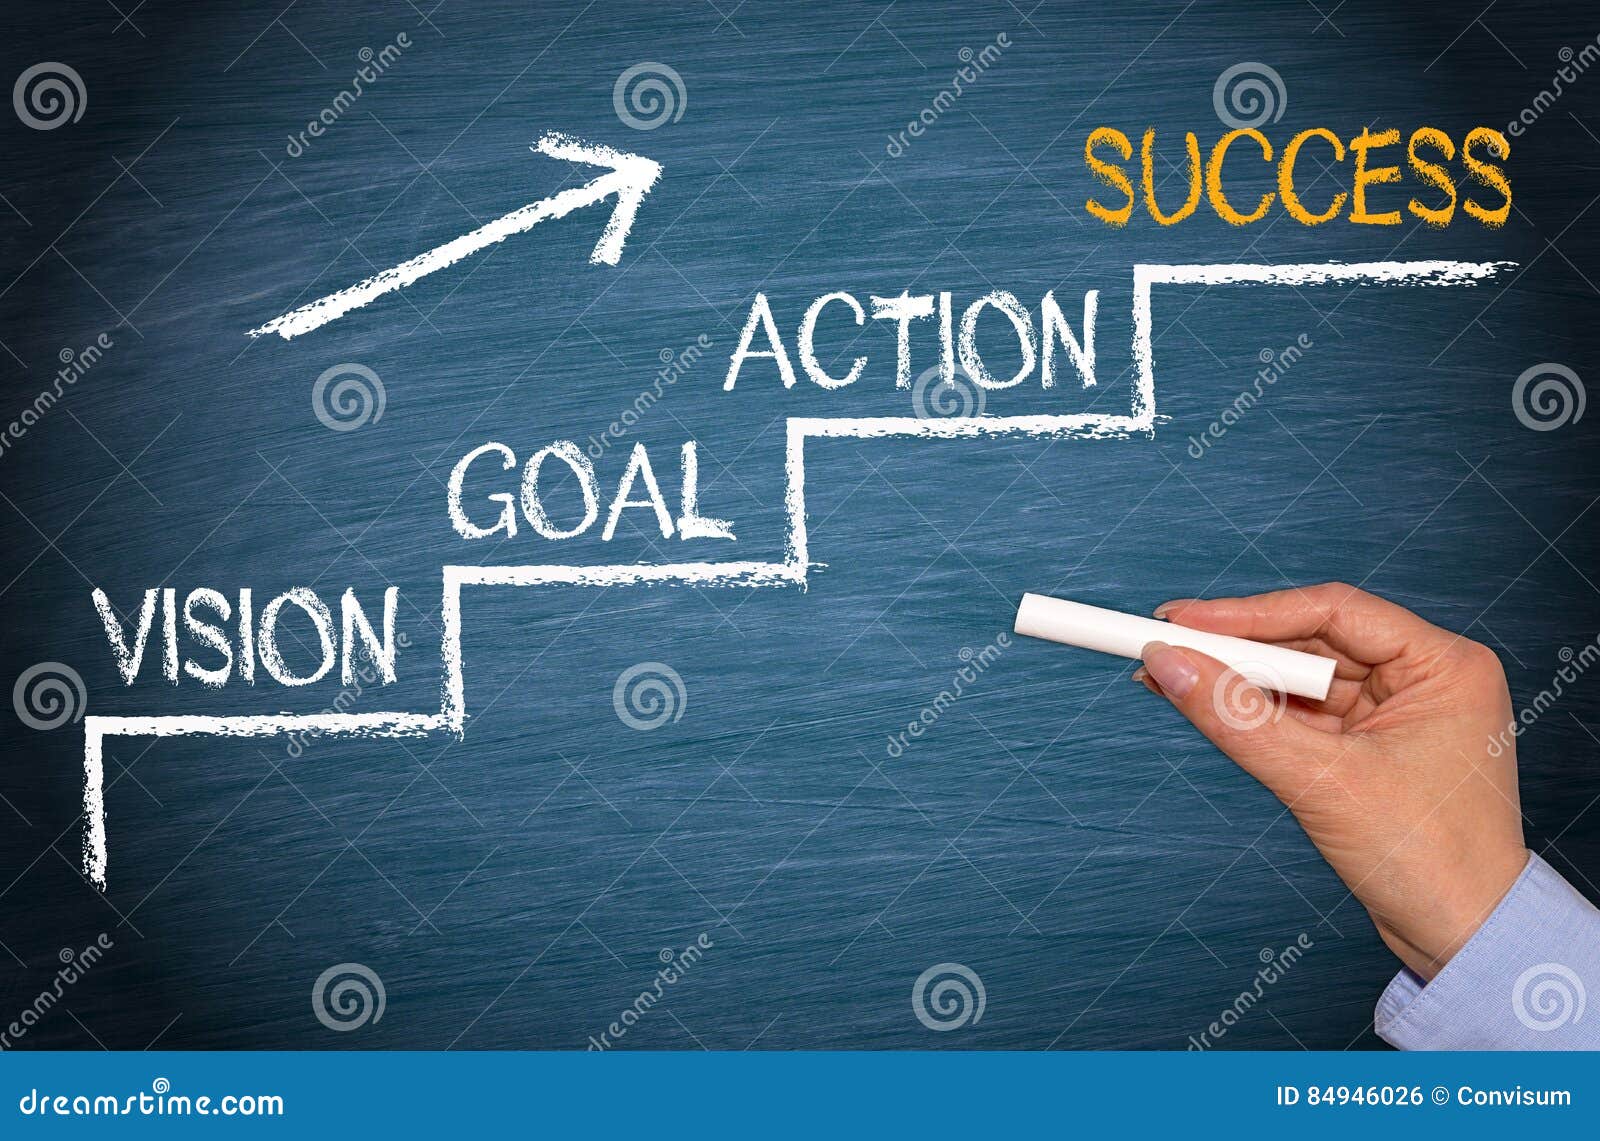 vision, goal, action, success - business strategy